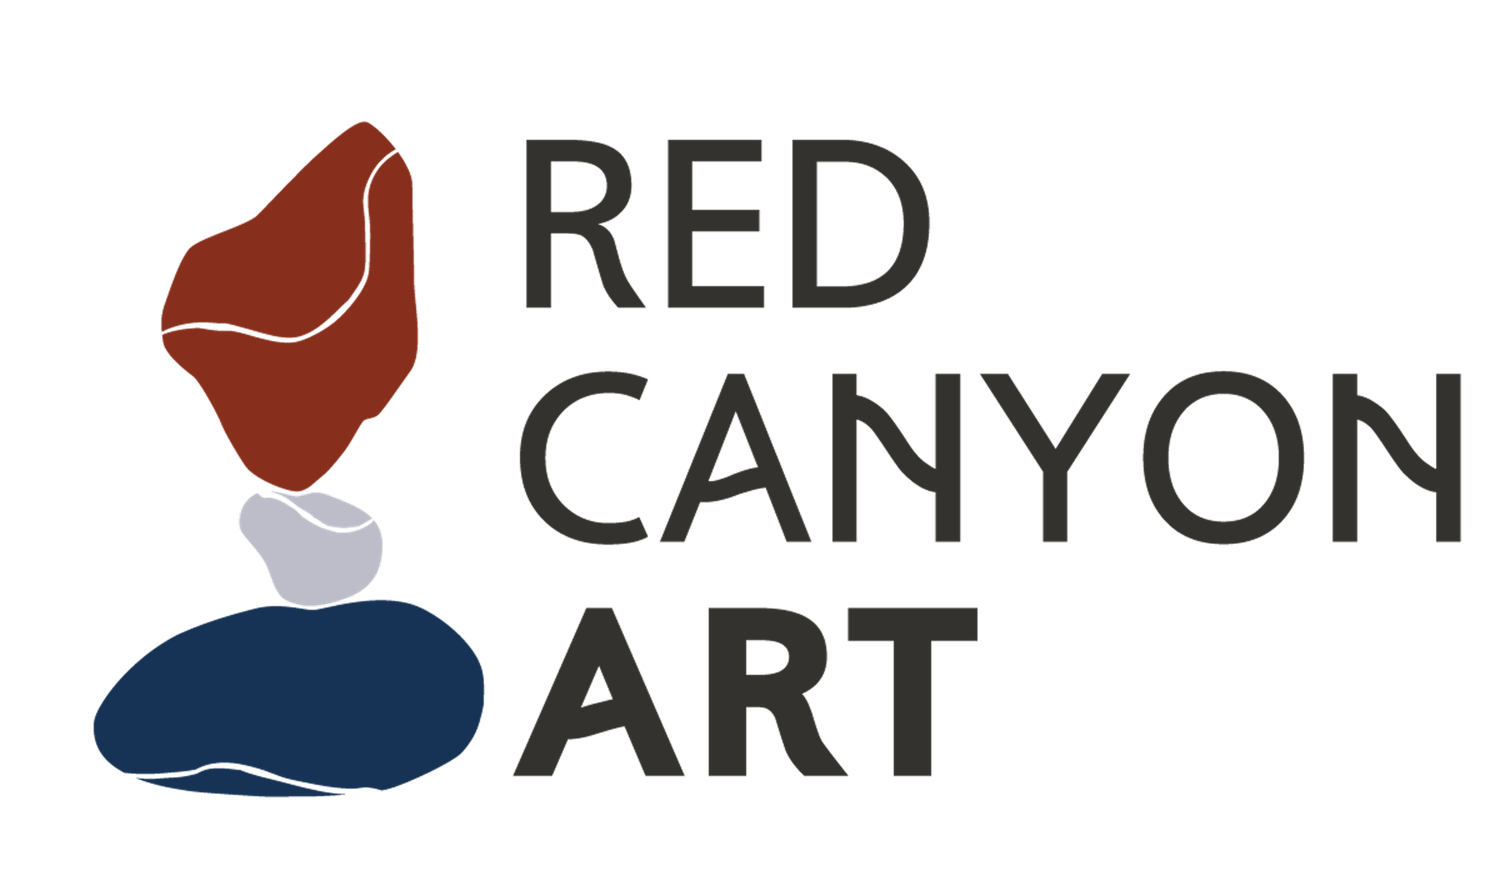 Red Canyon Art